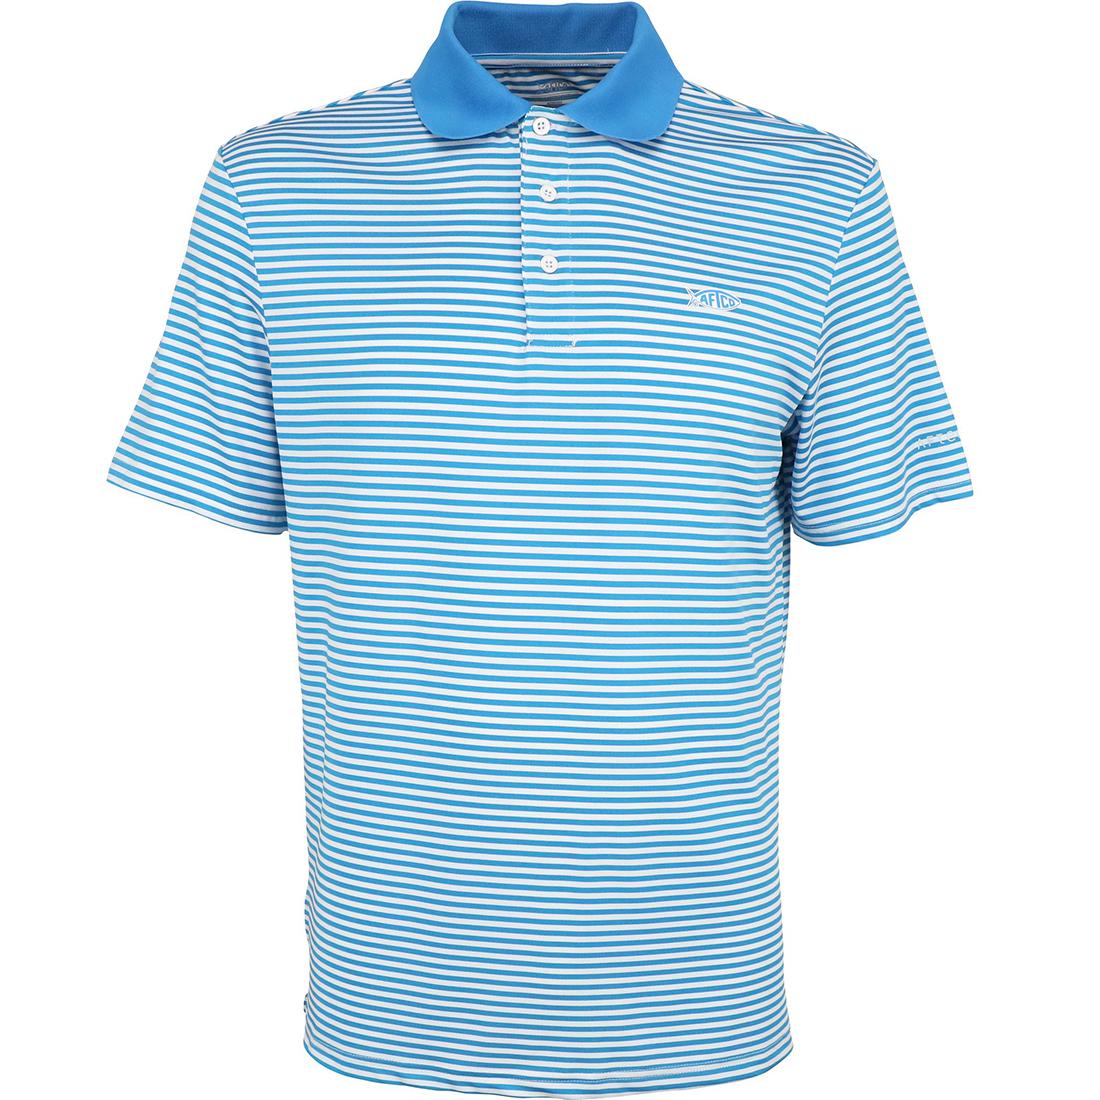 Aftco REPLAY SS POLO SHIRT